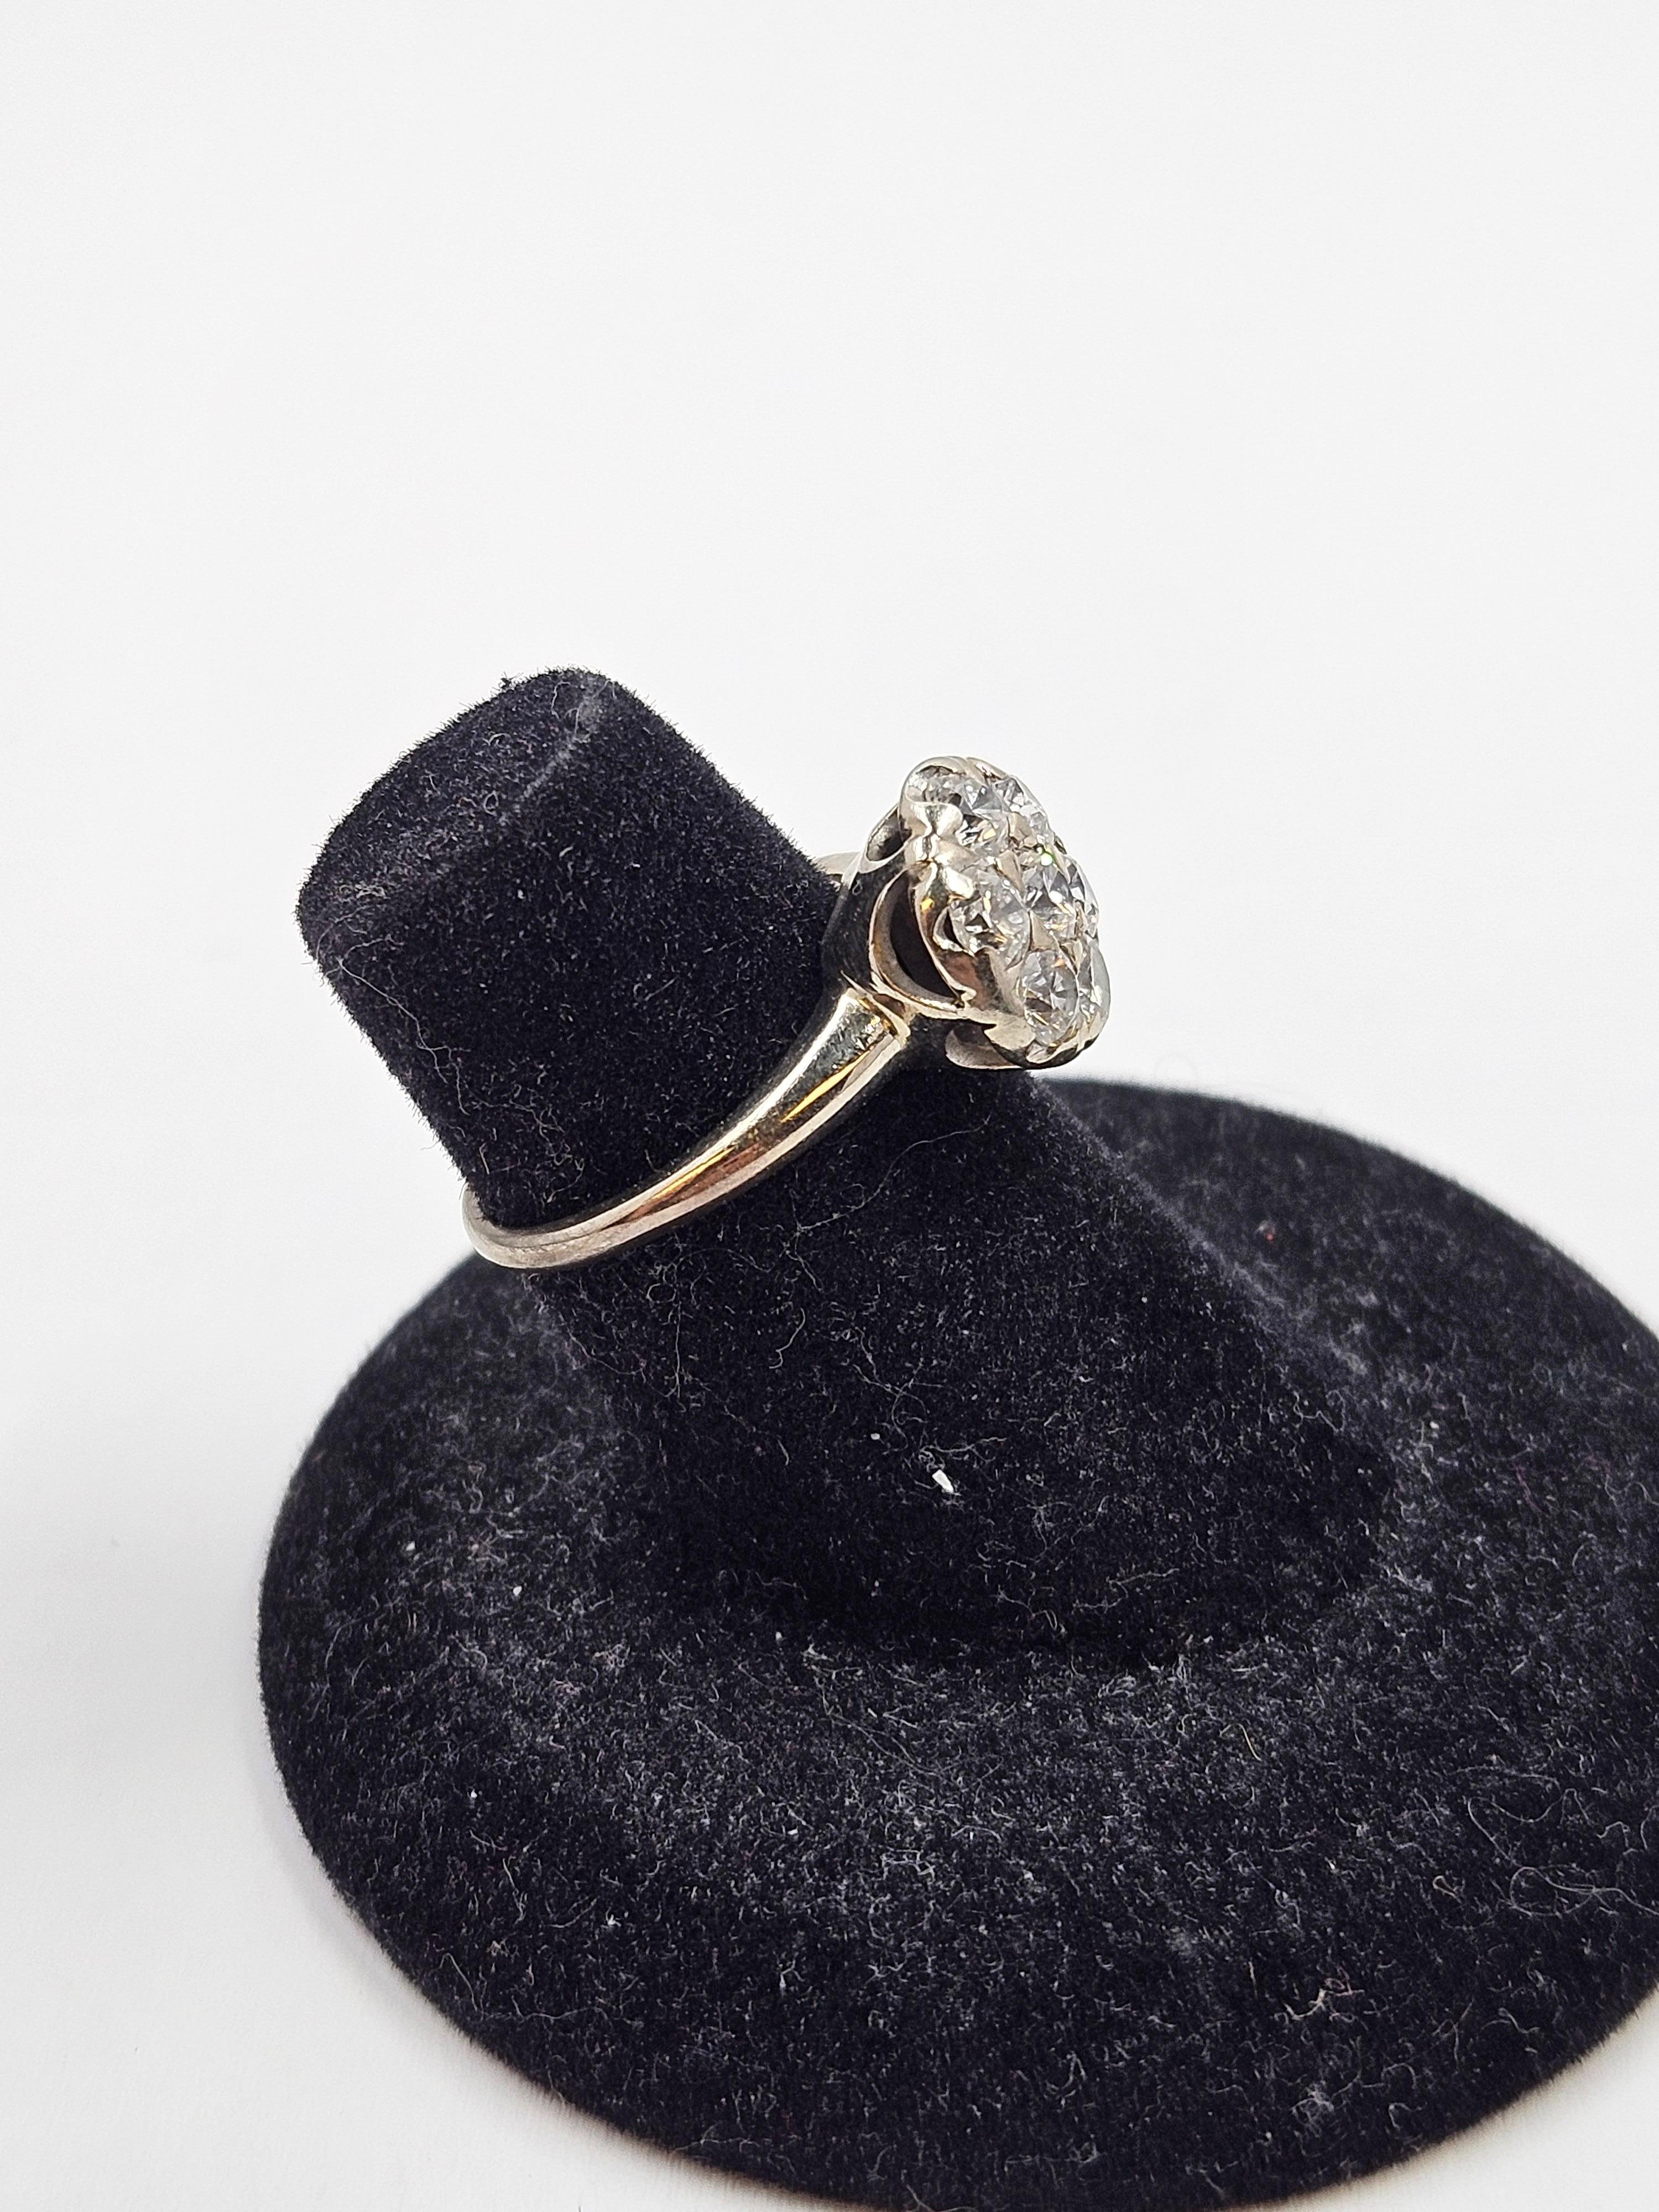 Antique Art Deco 18K White Gold Diamond Cluster Ring In Good Condition For Sale In Endwell, NY